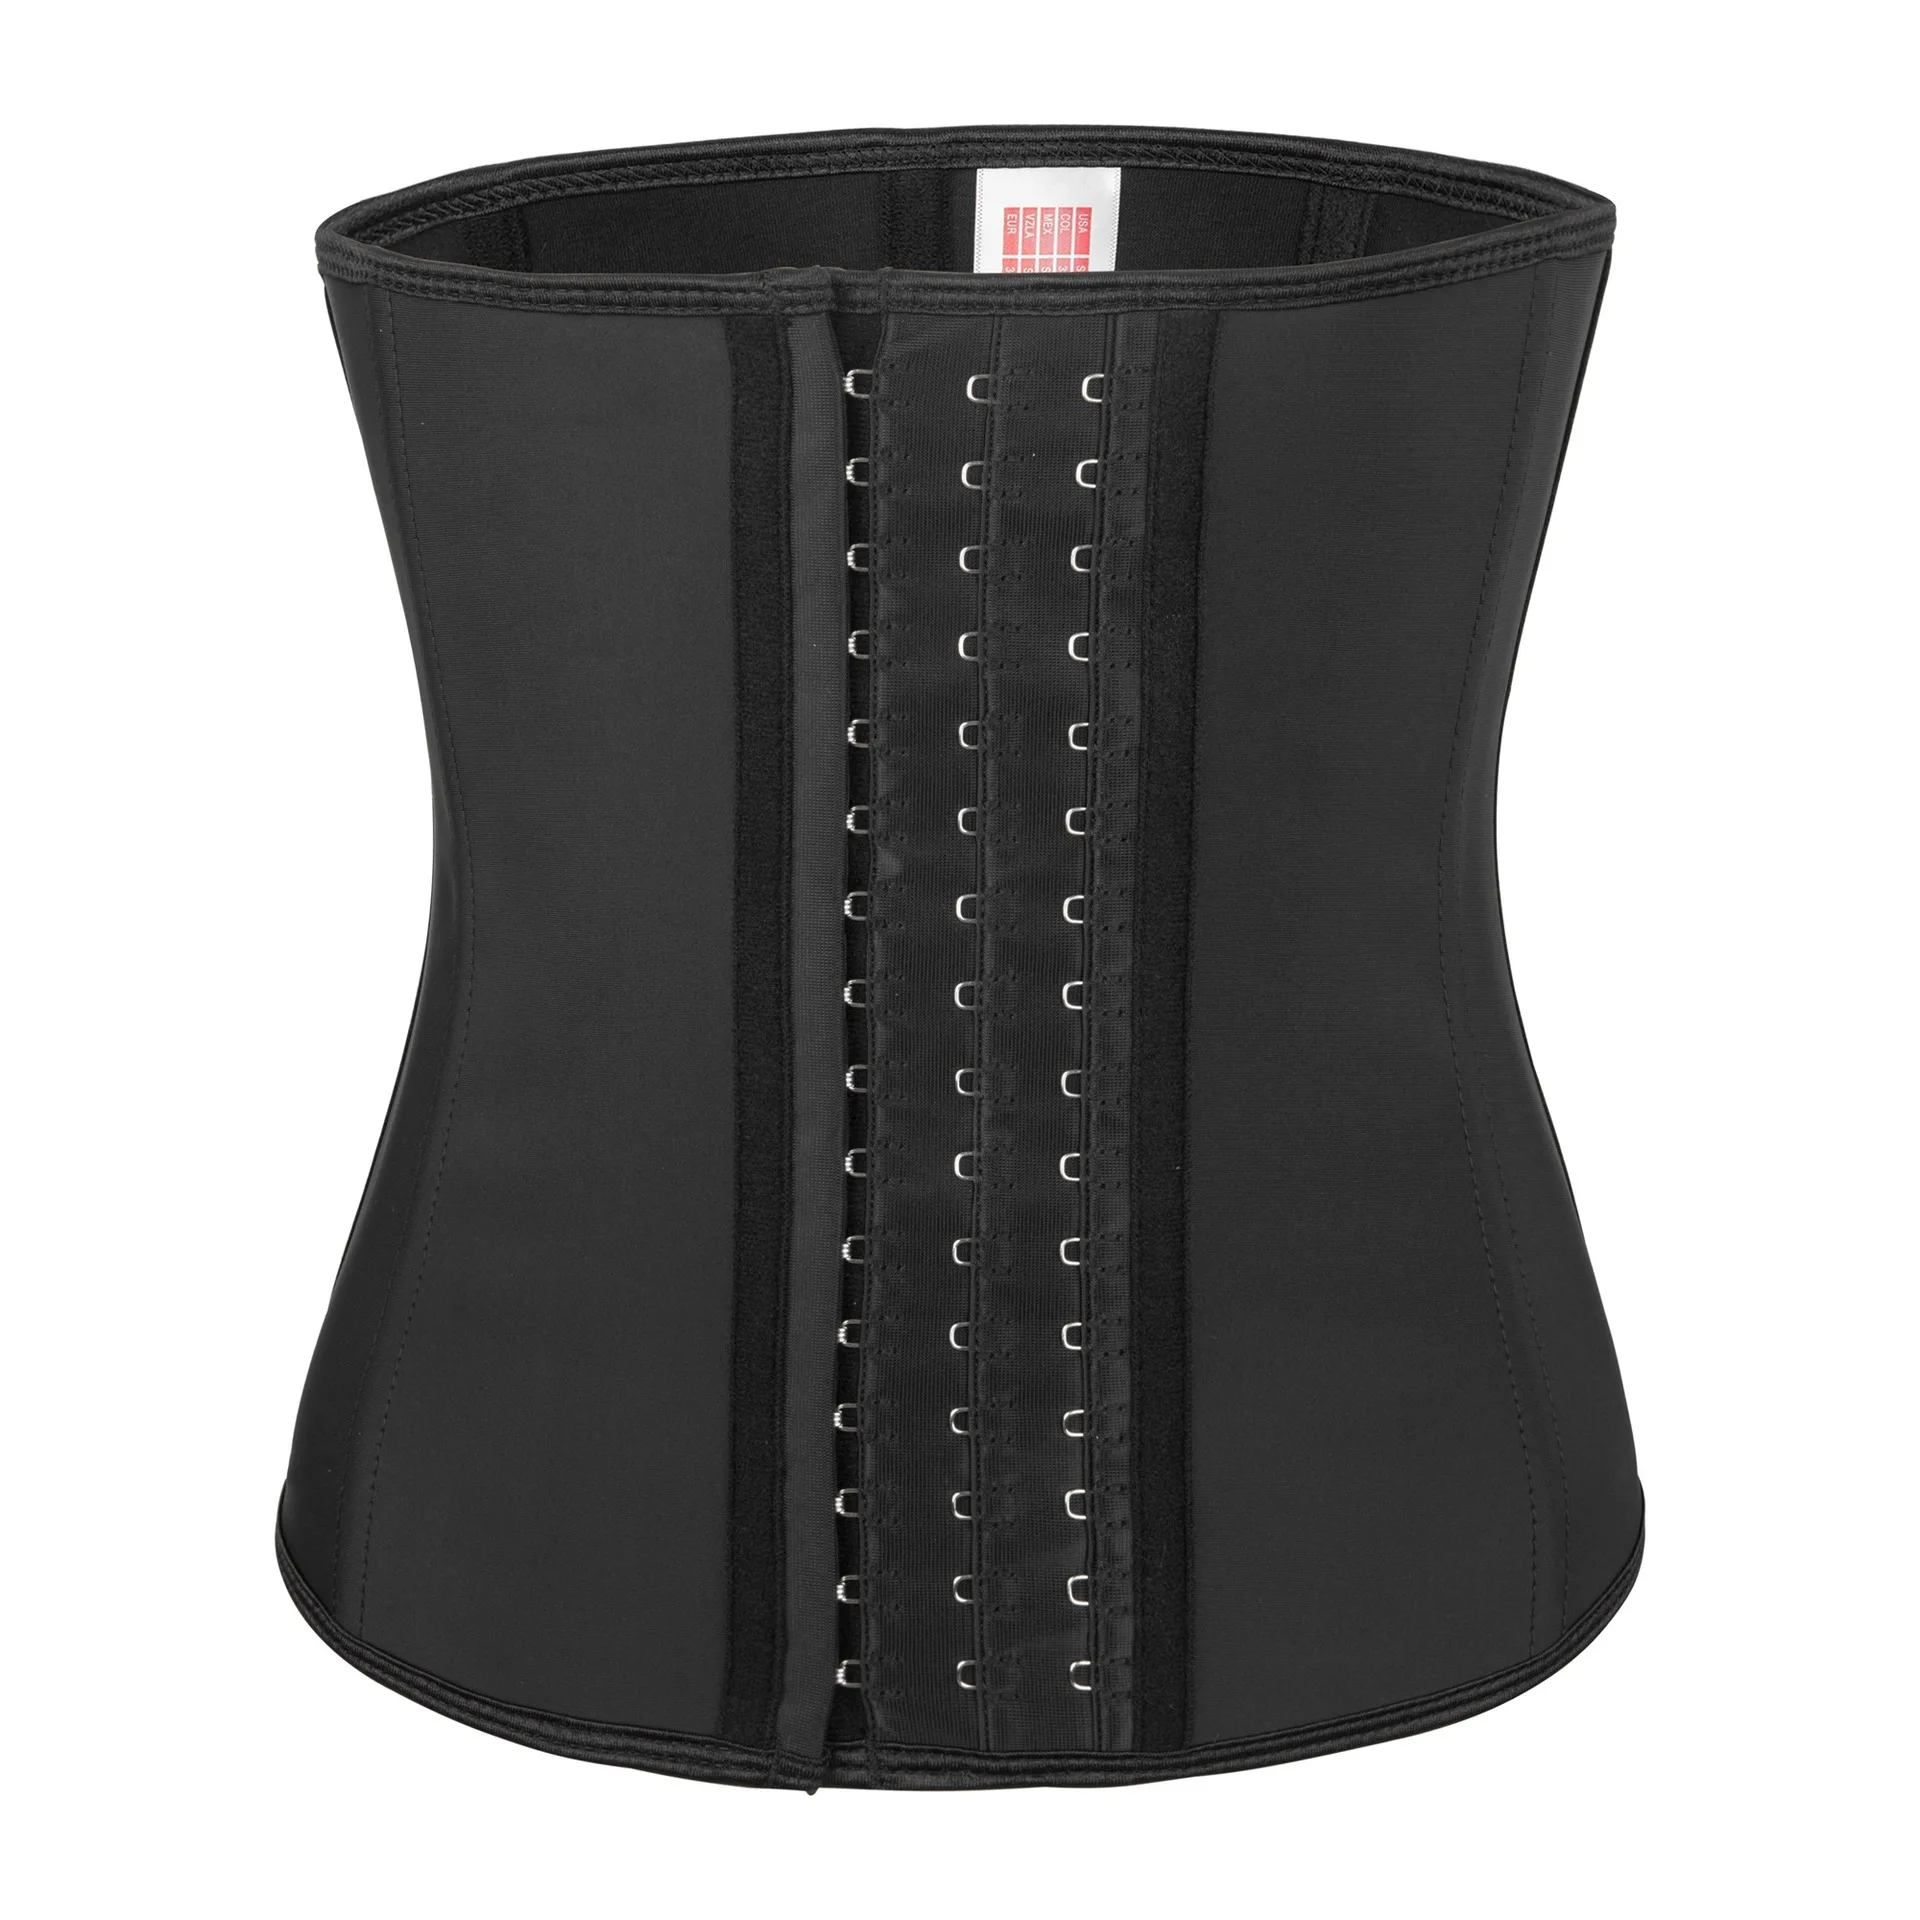 

2021 Waist Trainer Corset for Weight Loss Tummy Control Sport Workout Body Shaper Black, Photo